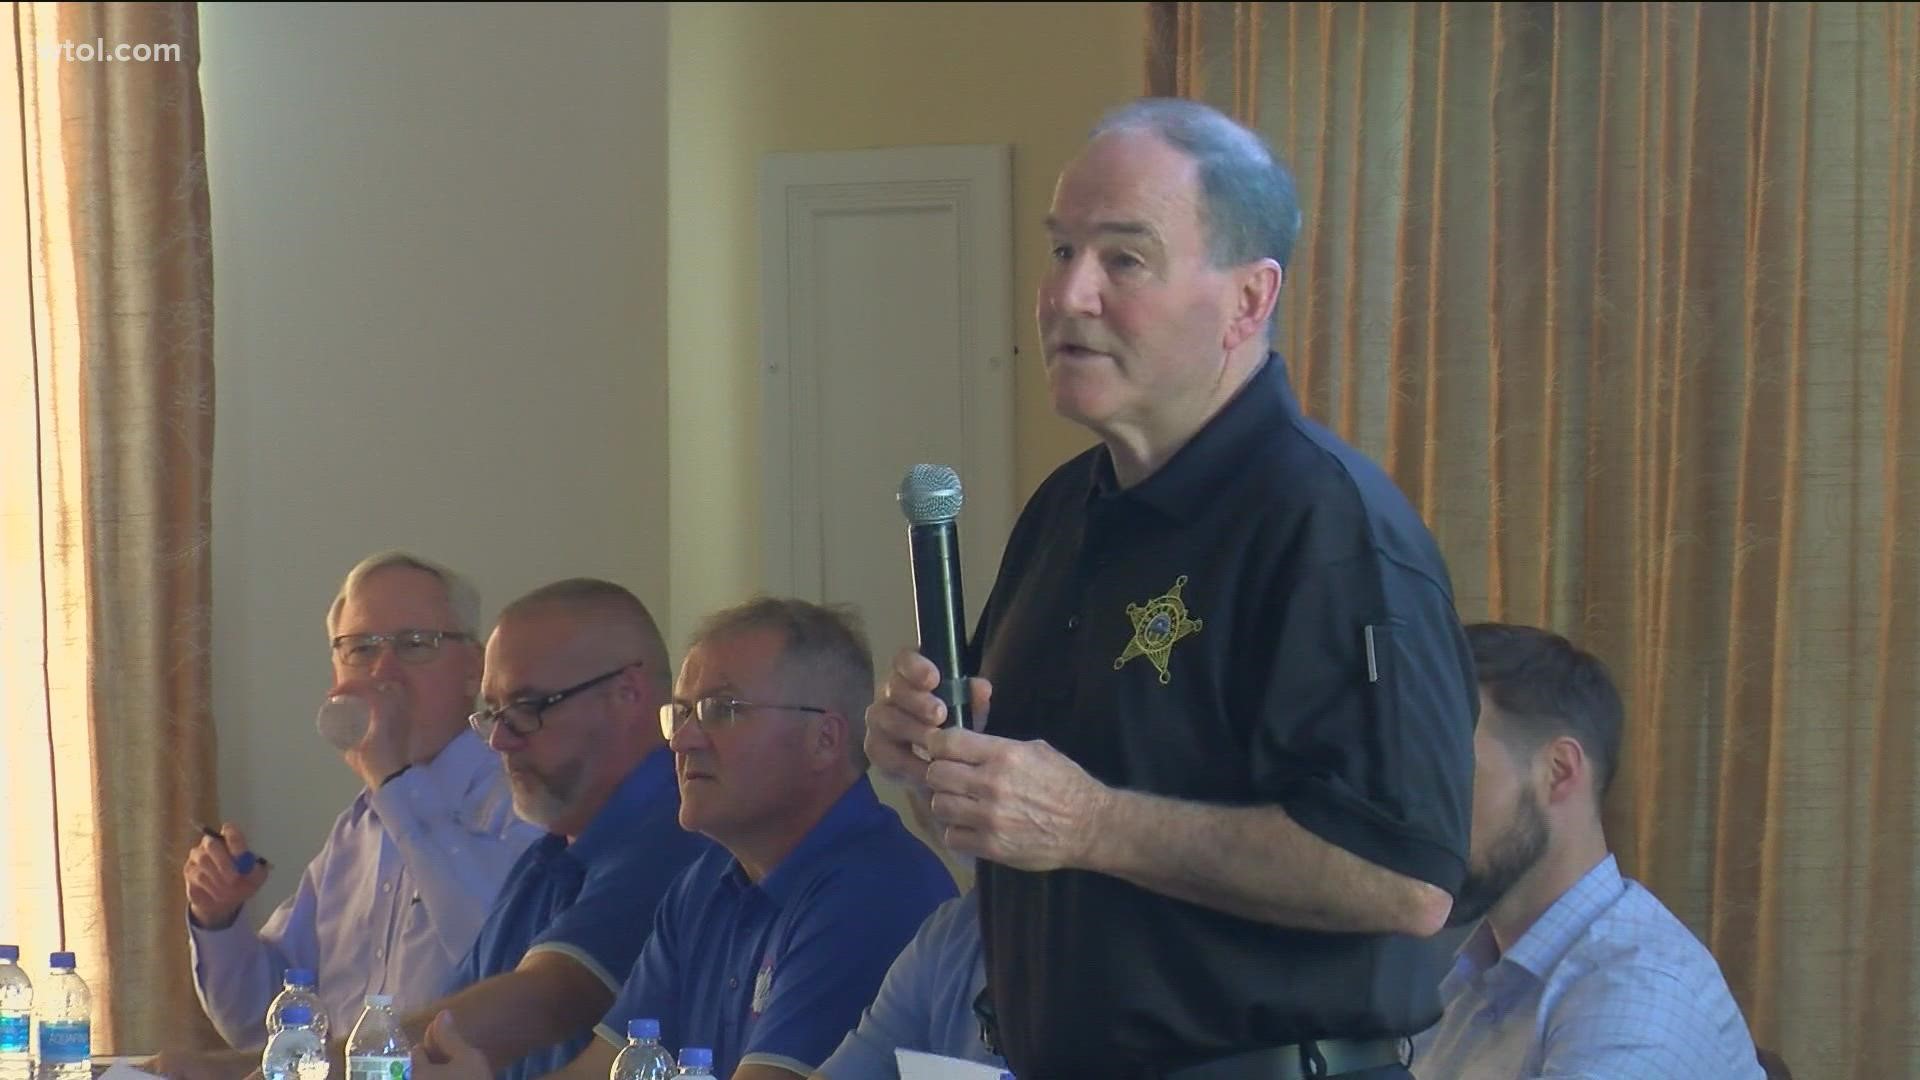 Lucas County Sheriff Mike Navarre says the levy pays for his deputies to respond to non-emergency calls in the township and without it, they just can't.